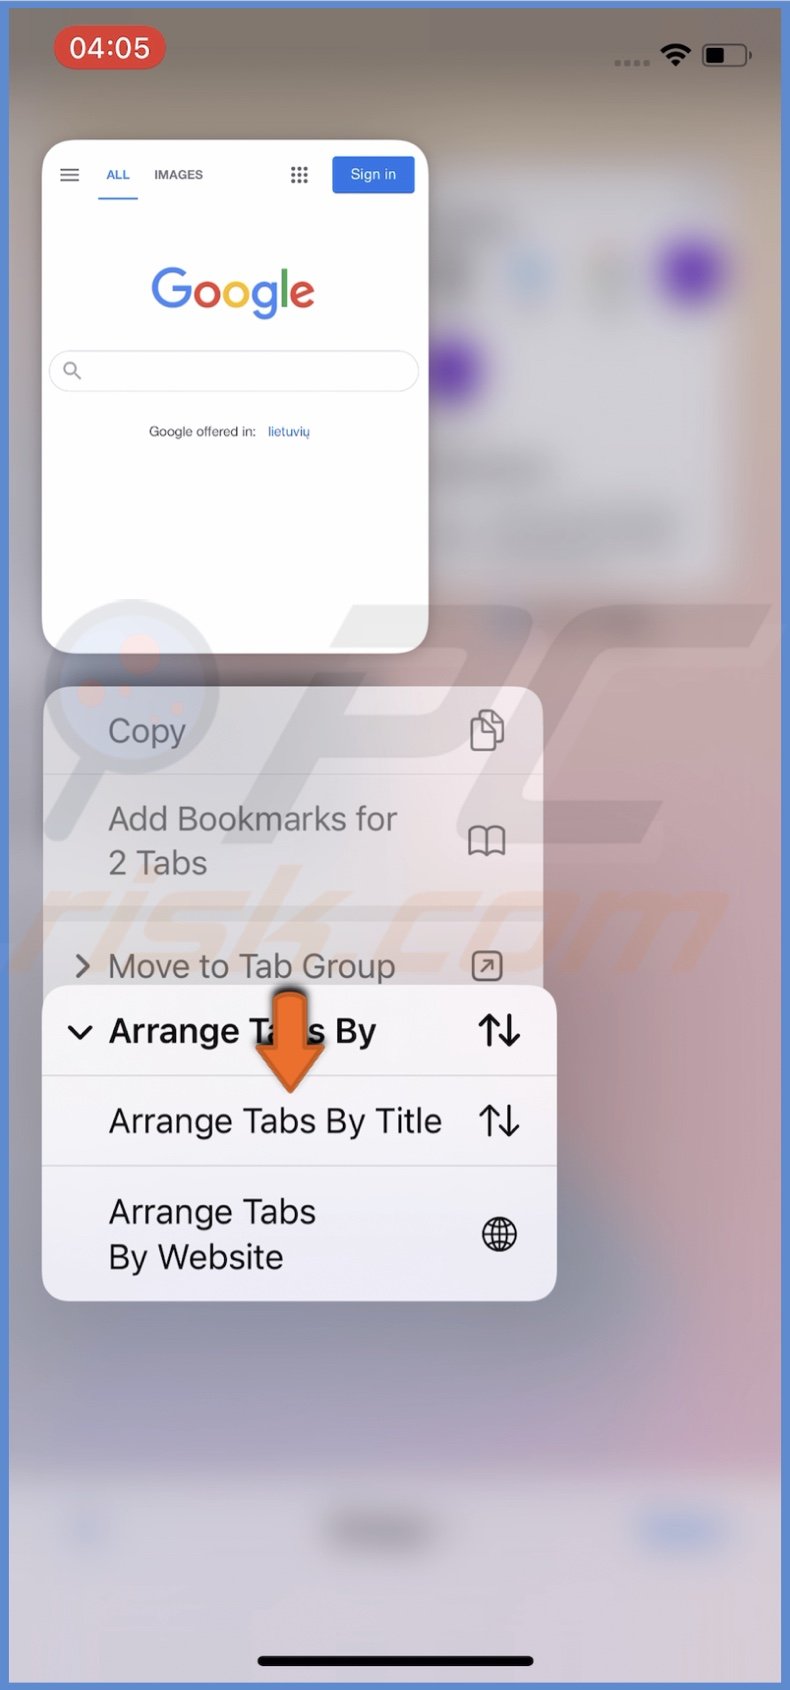 Select how to arrange tabs